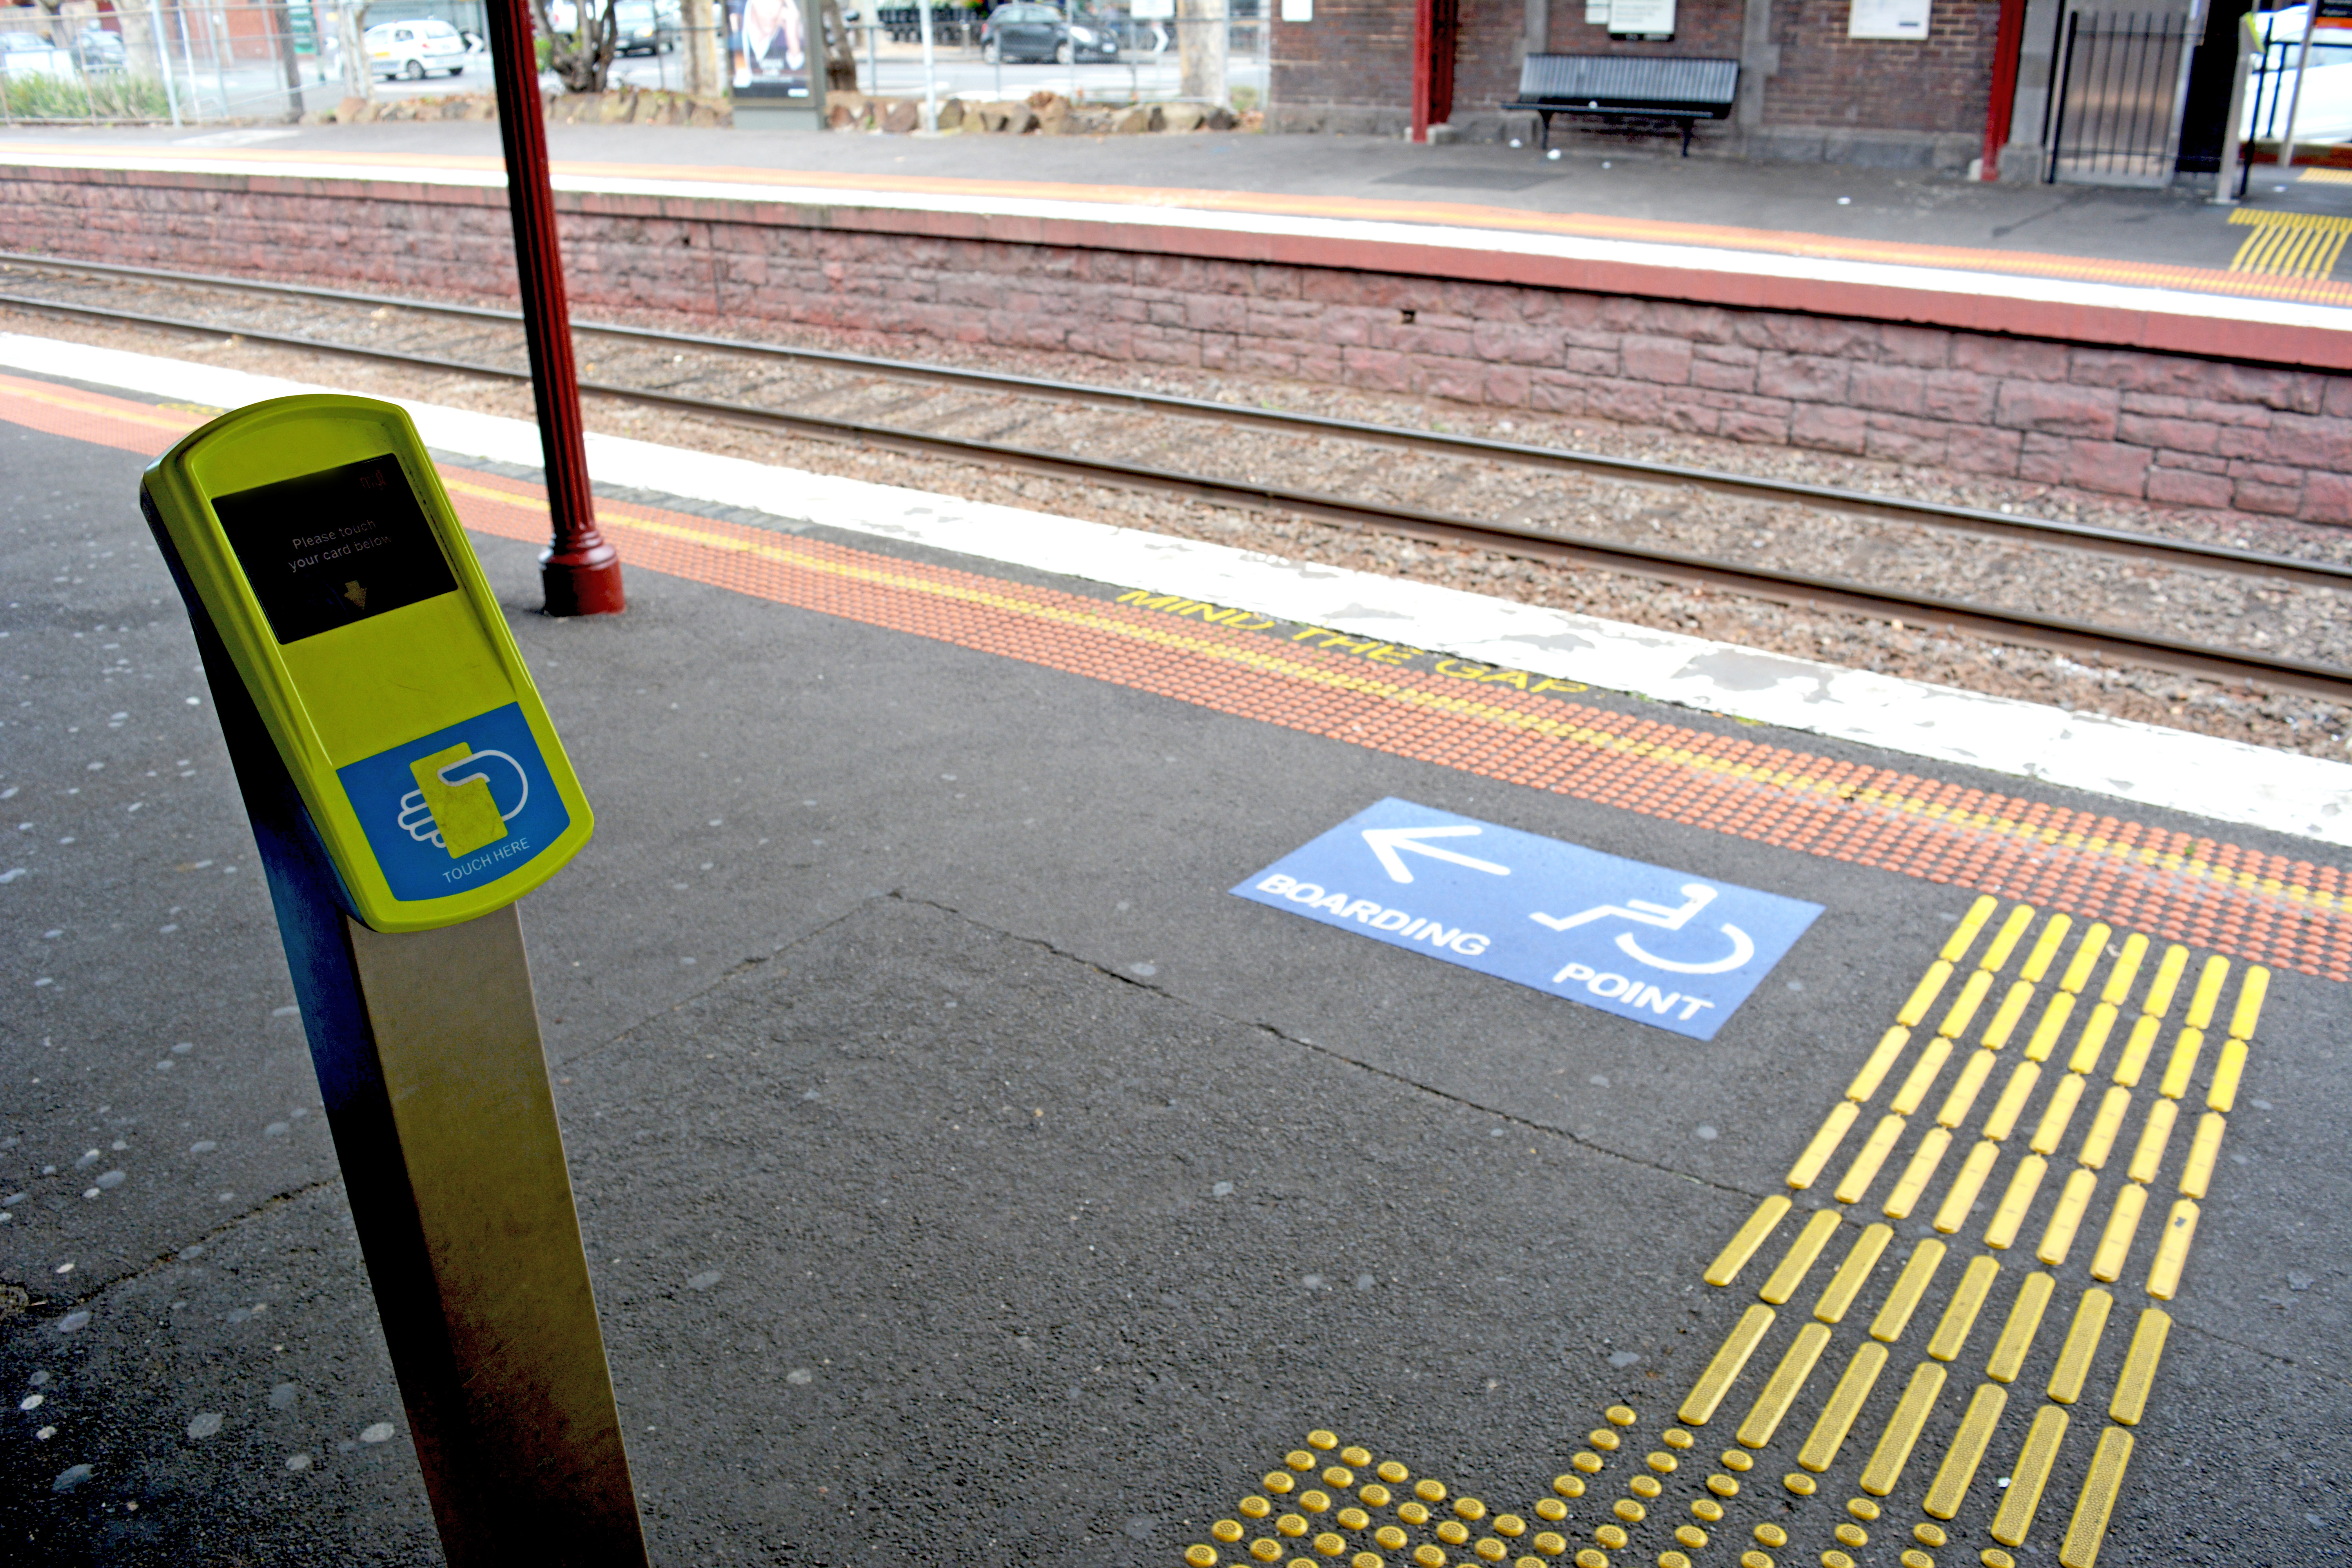 Photo of a platform with a directional boarding point decal and a myki machine. The words “Mind the Gap” have been stencilled onto the platform next to the edge. 